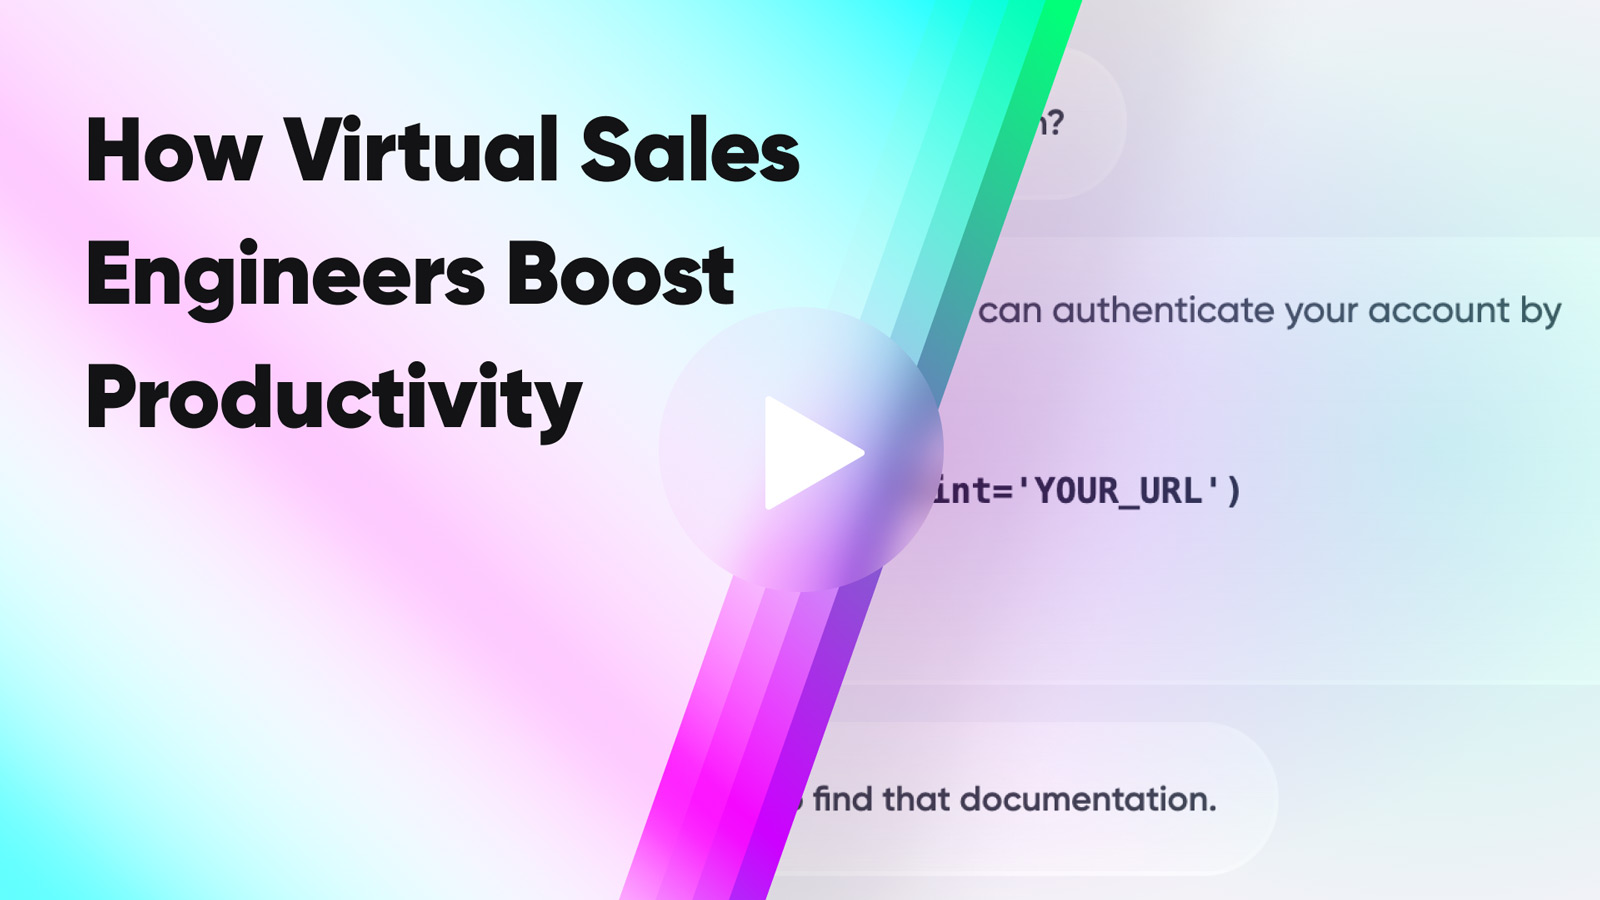 How Virtual Sales Engineers Boost Productivity